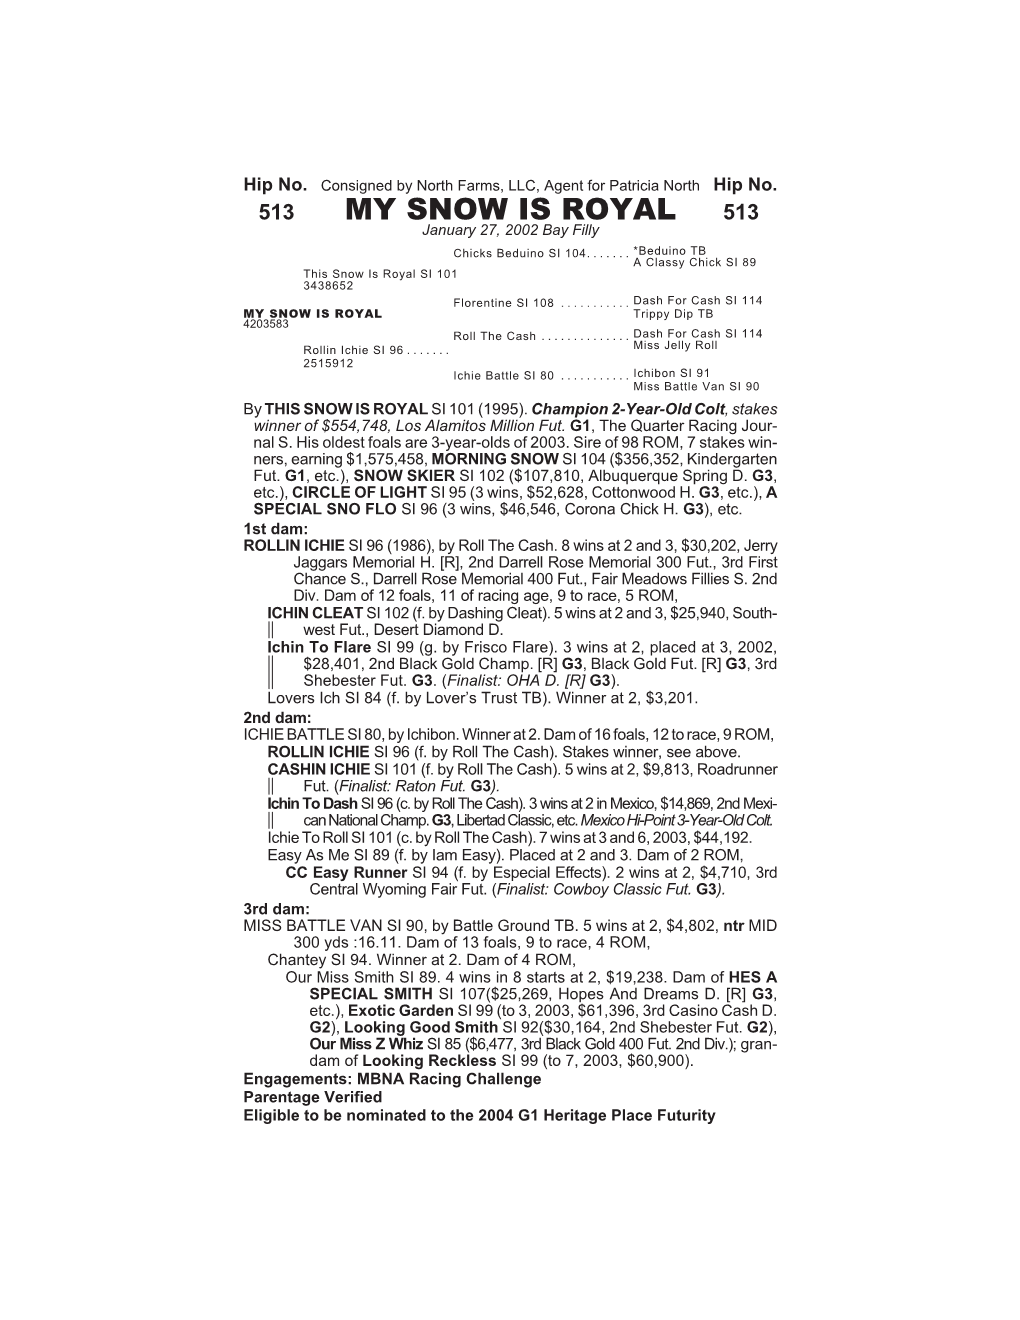 MY SNOW IS ROYAL 513 January 27, 2002 Bay Filly Chicks Beduino SI 104